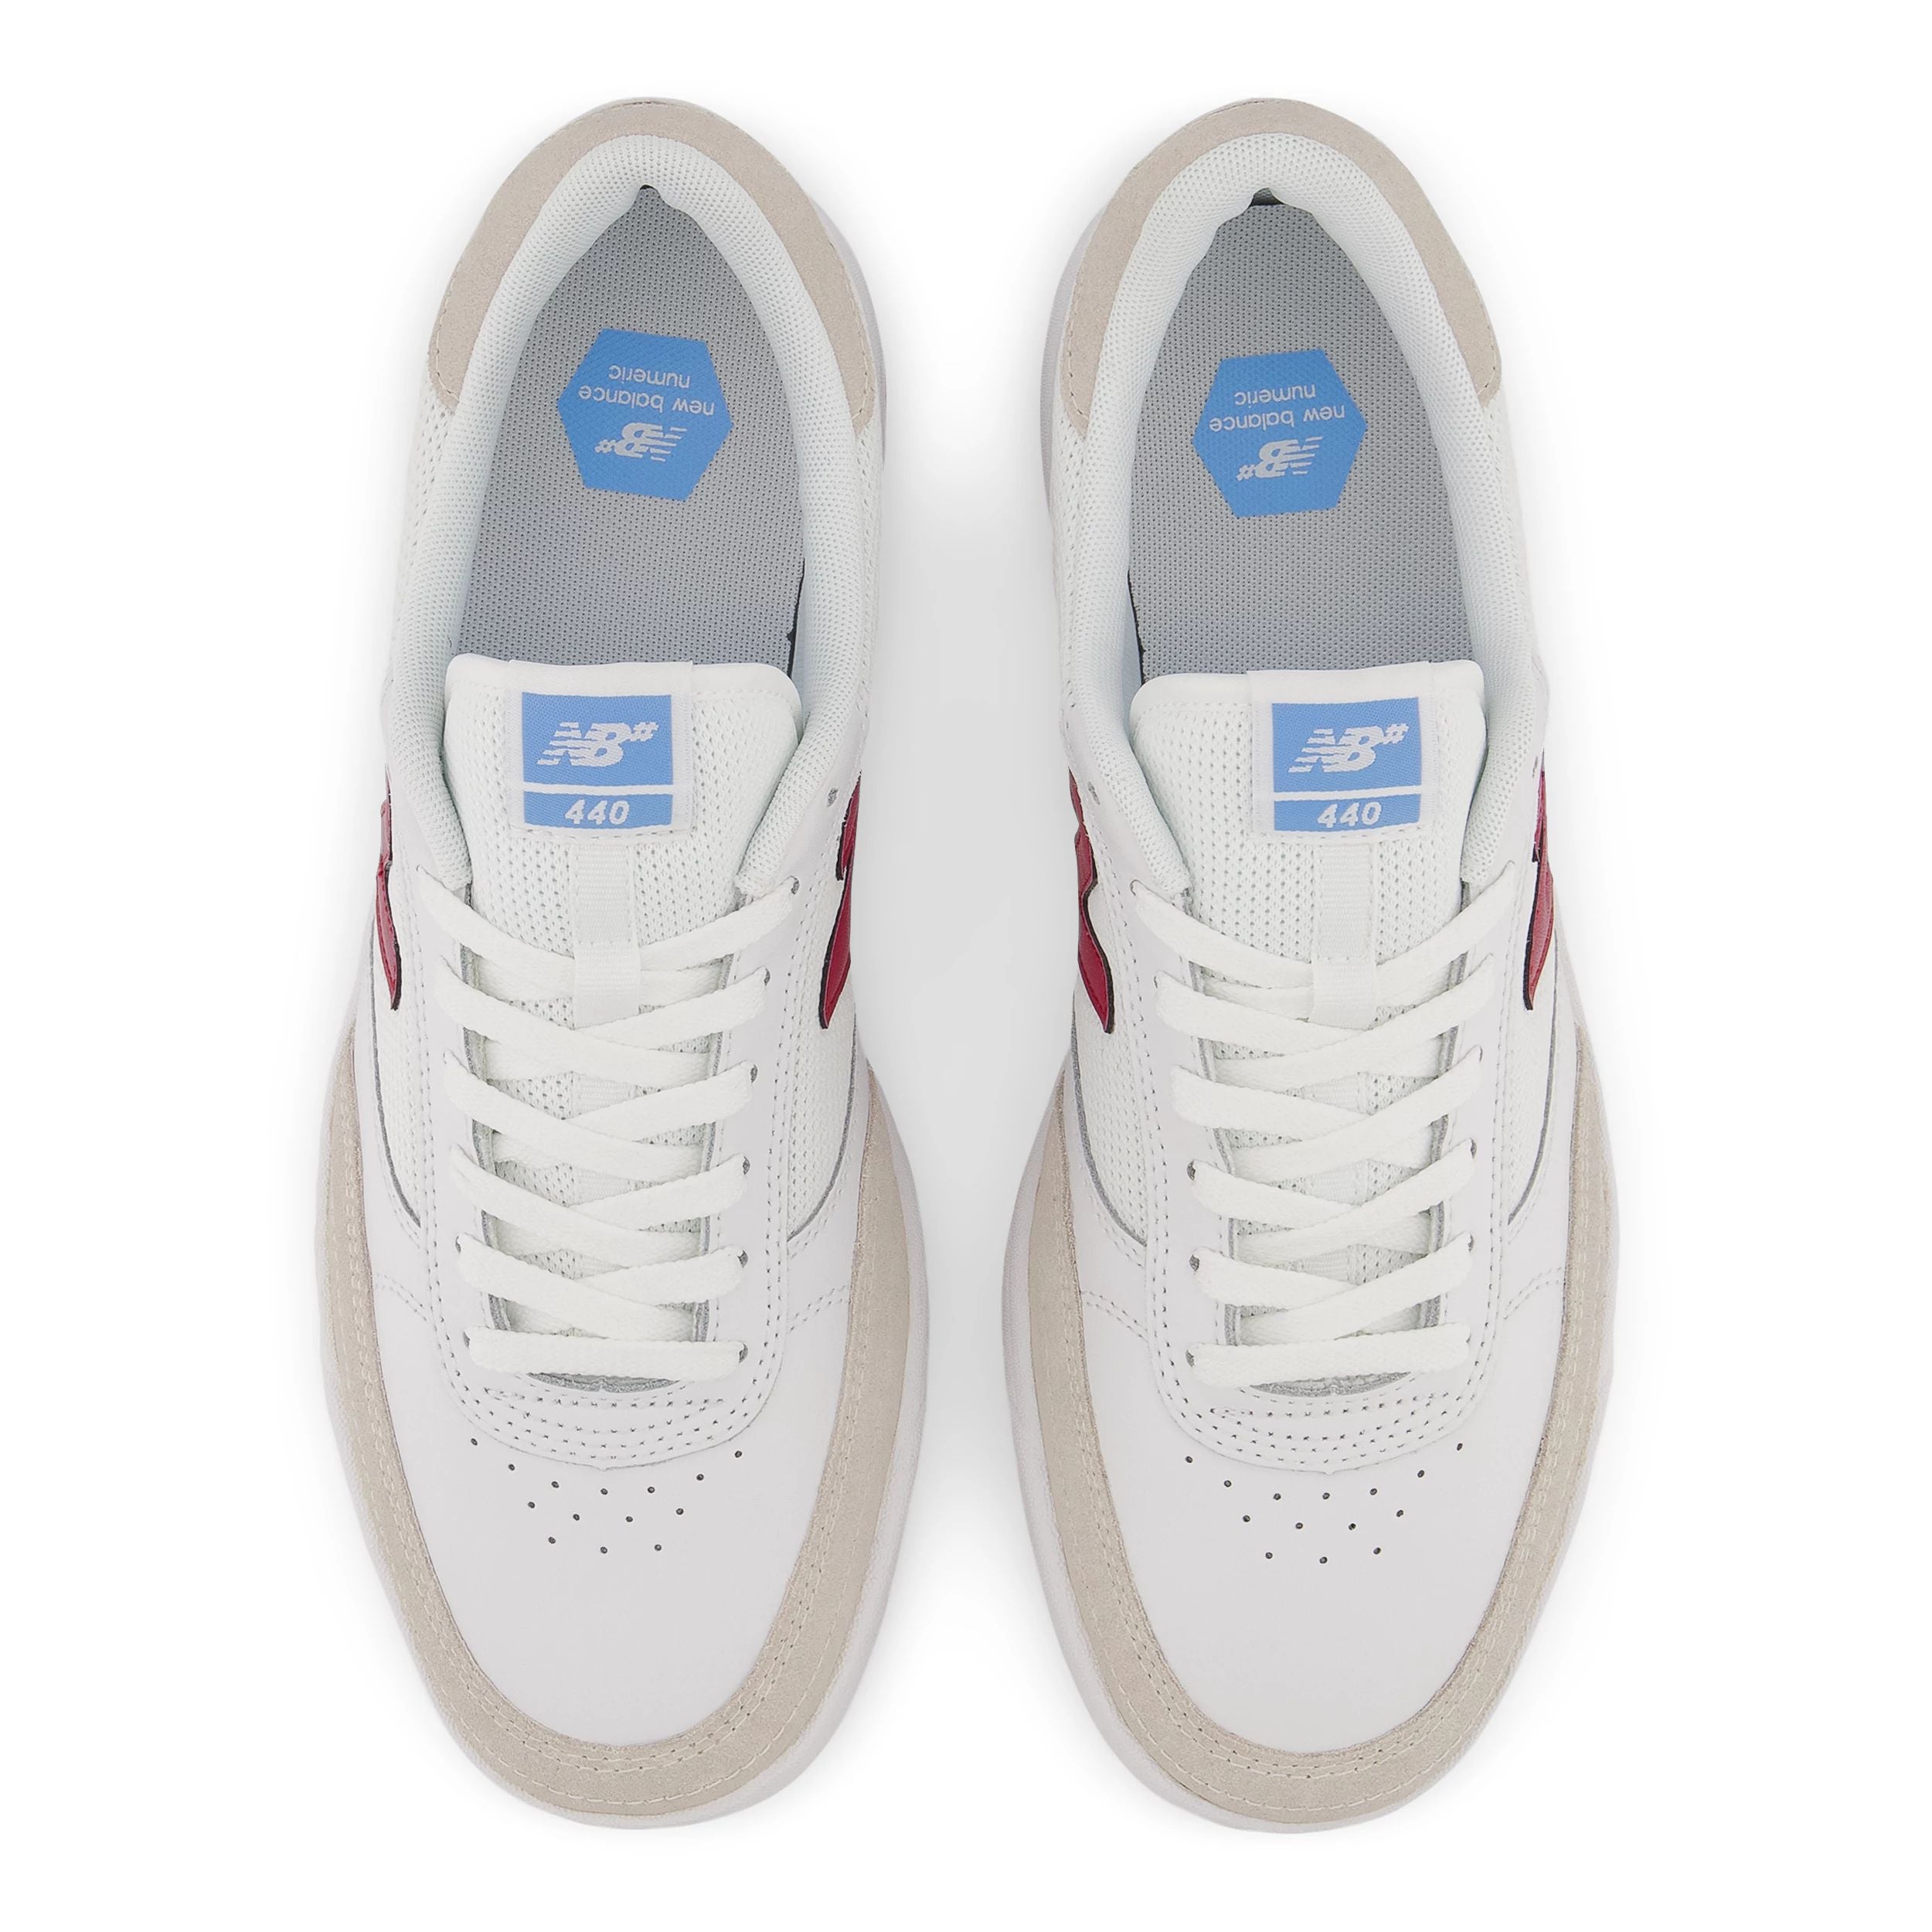 White/Red NM440 NB Numeric Skateboard Shoe Top